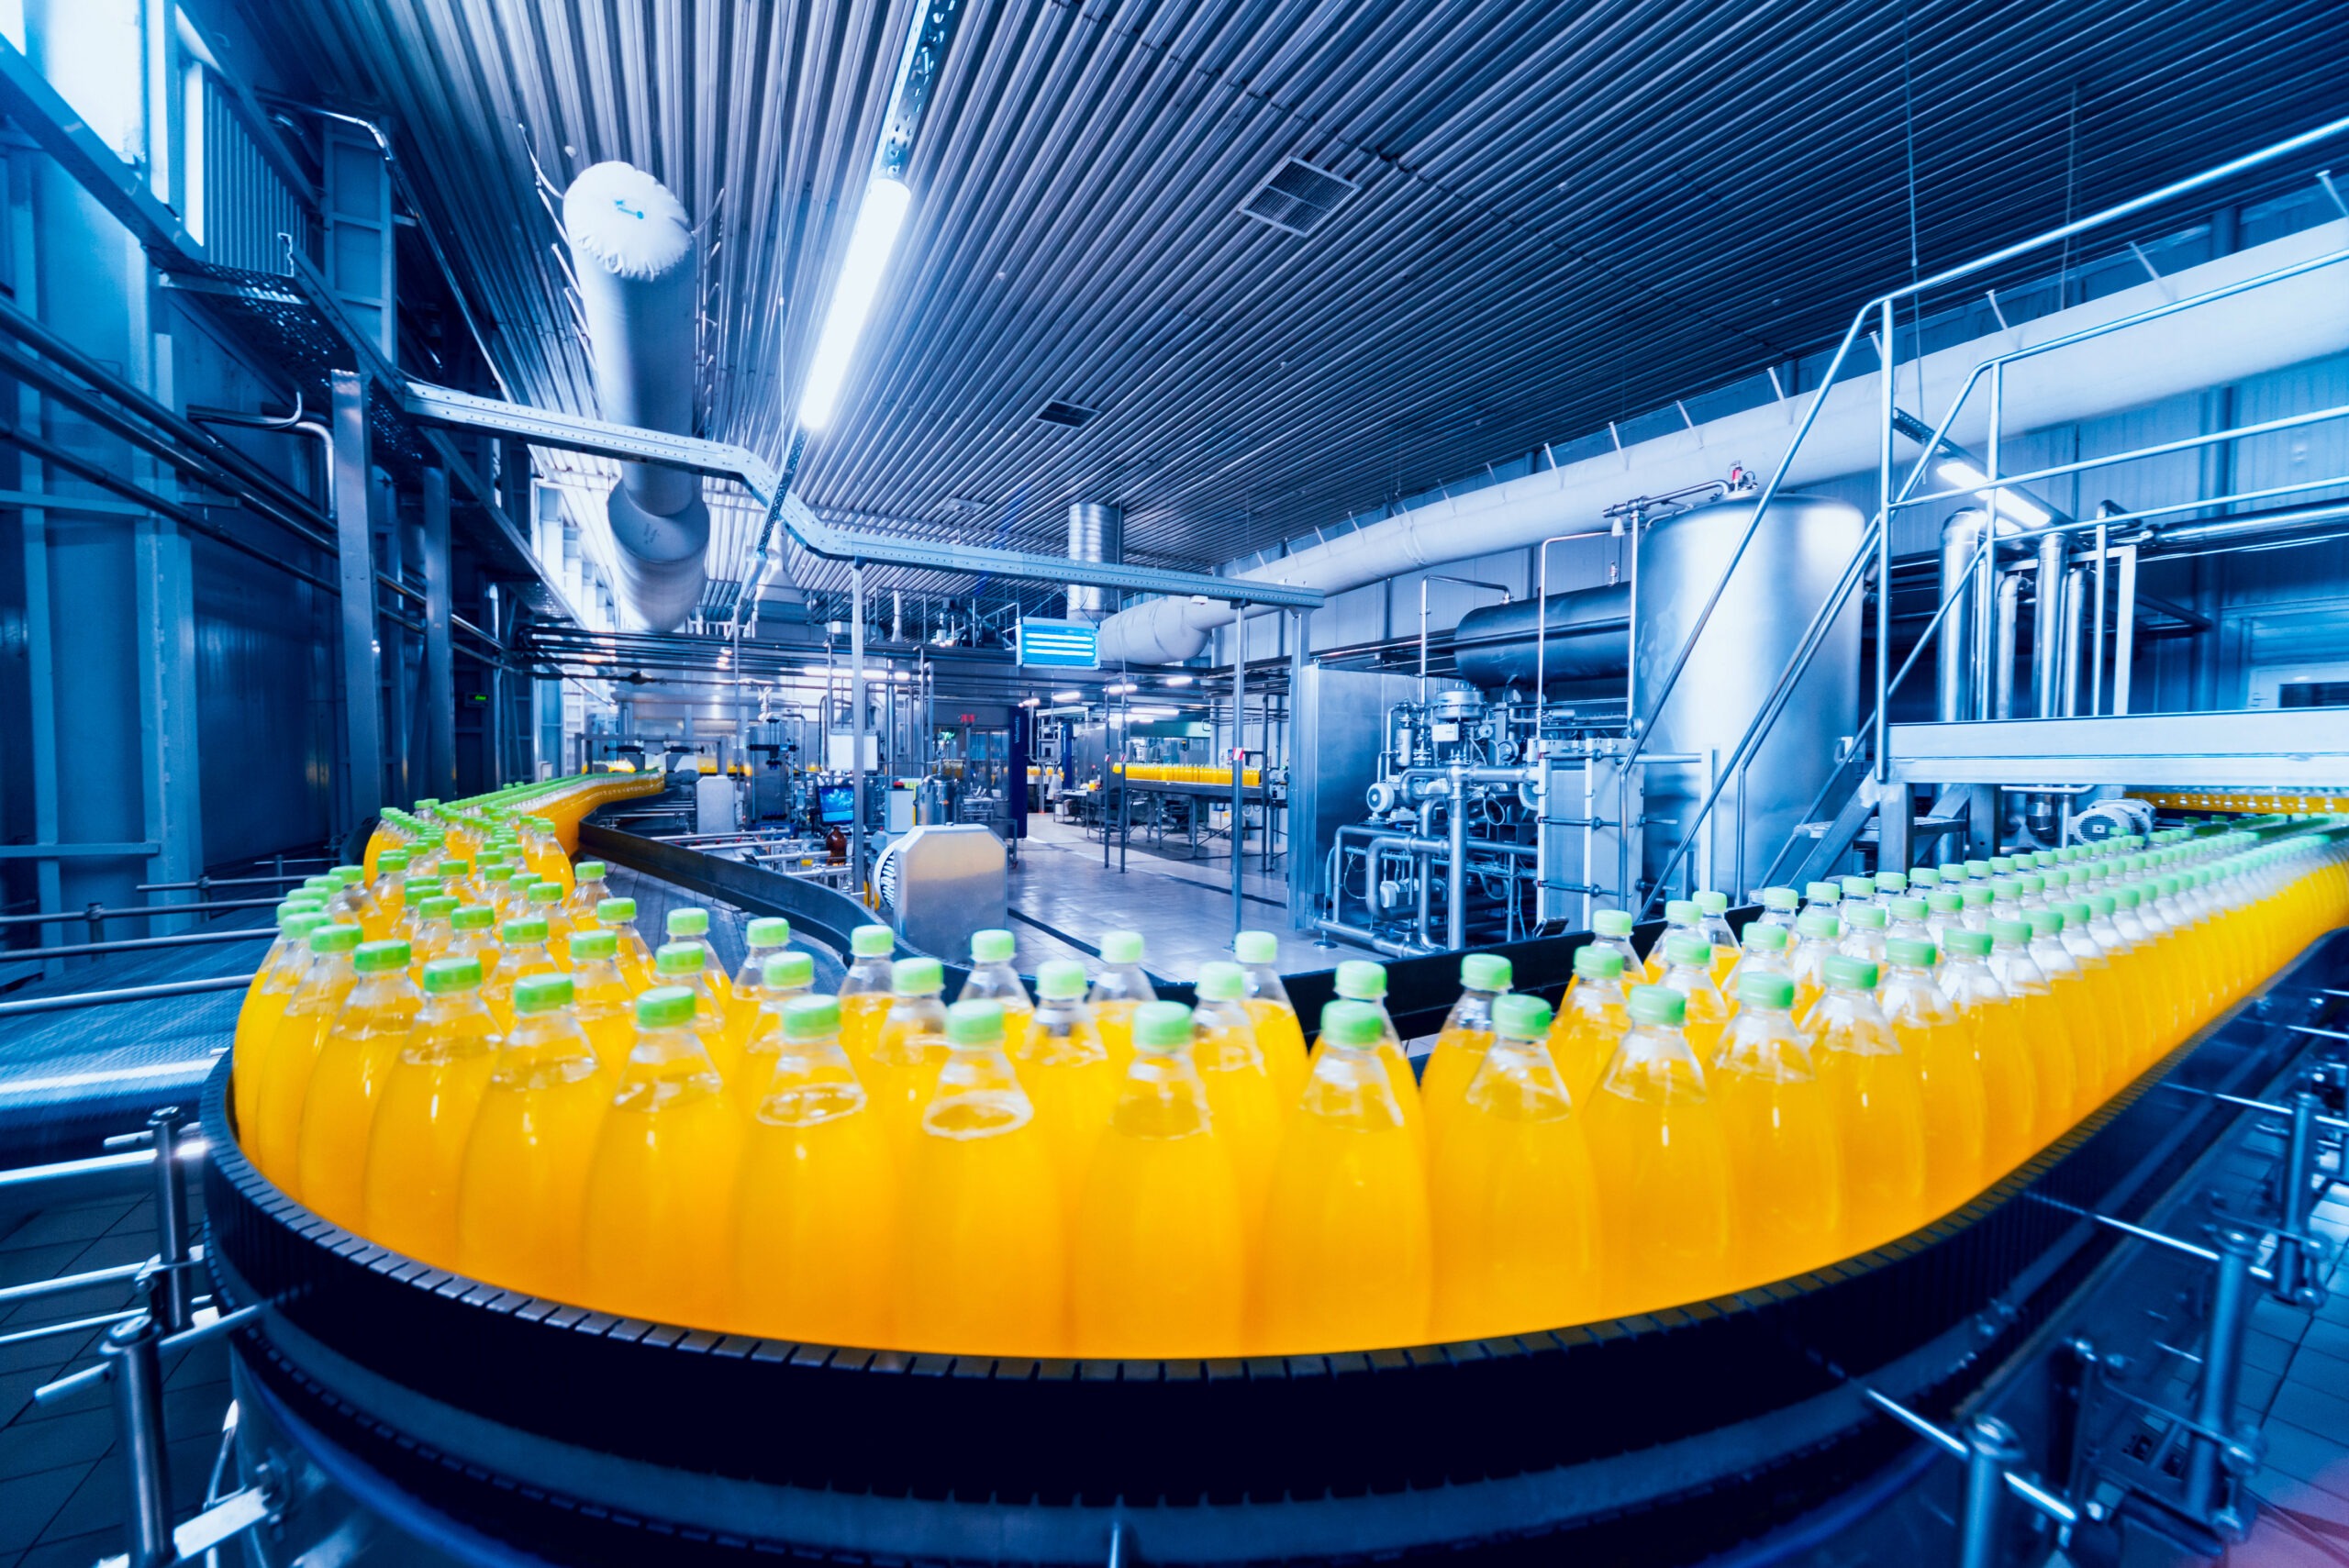 Blog: Hydraulics and pneumatics in food and beverage production